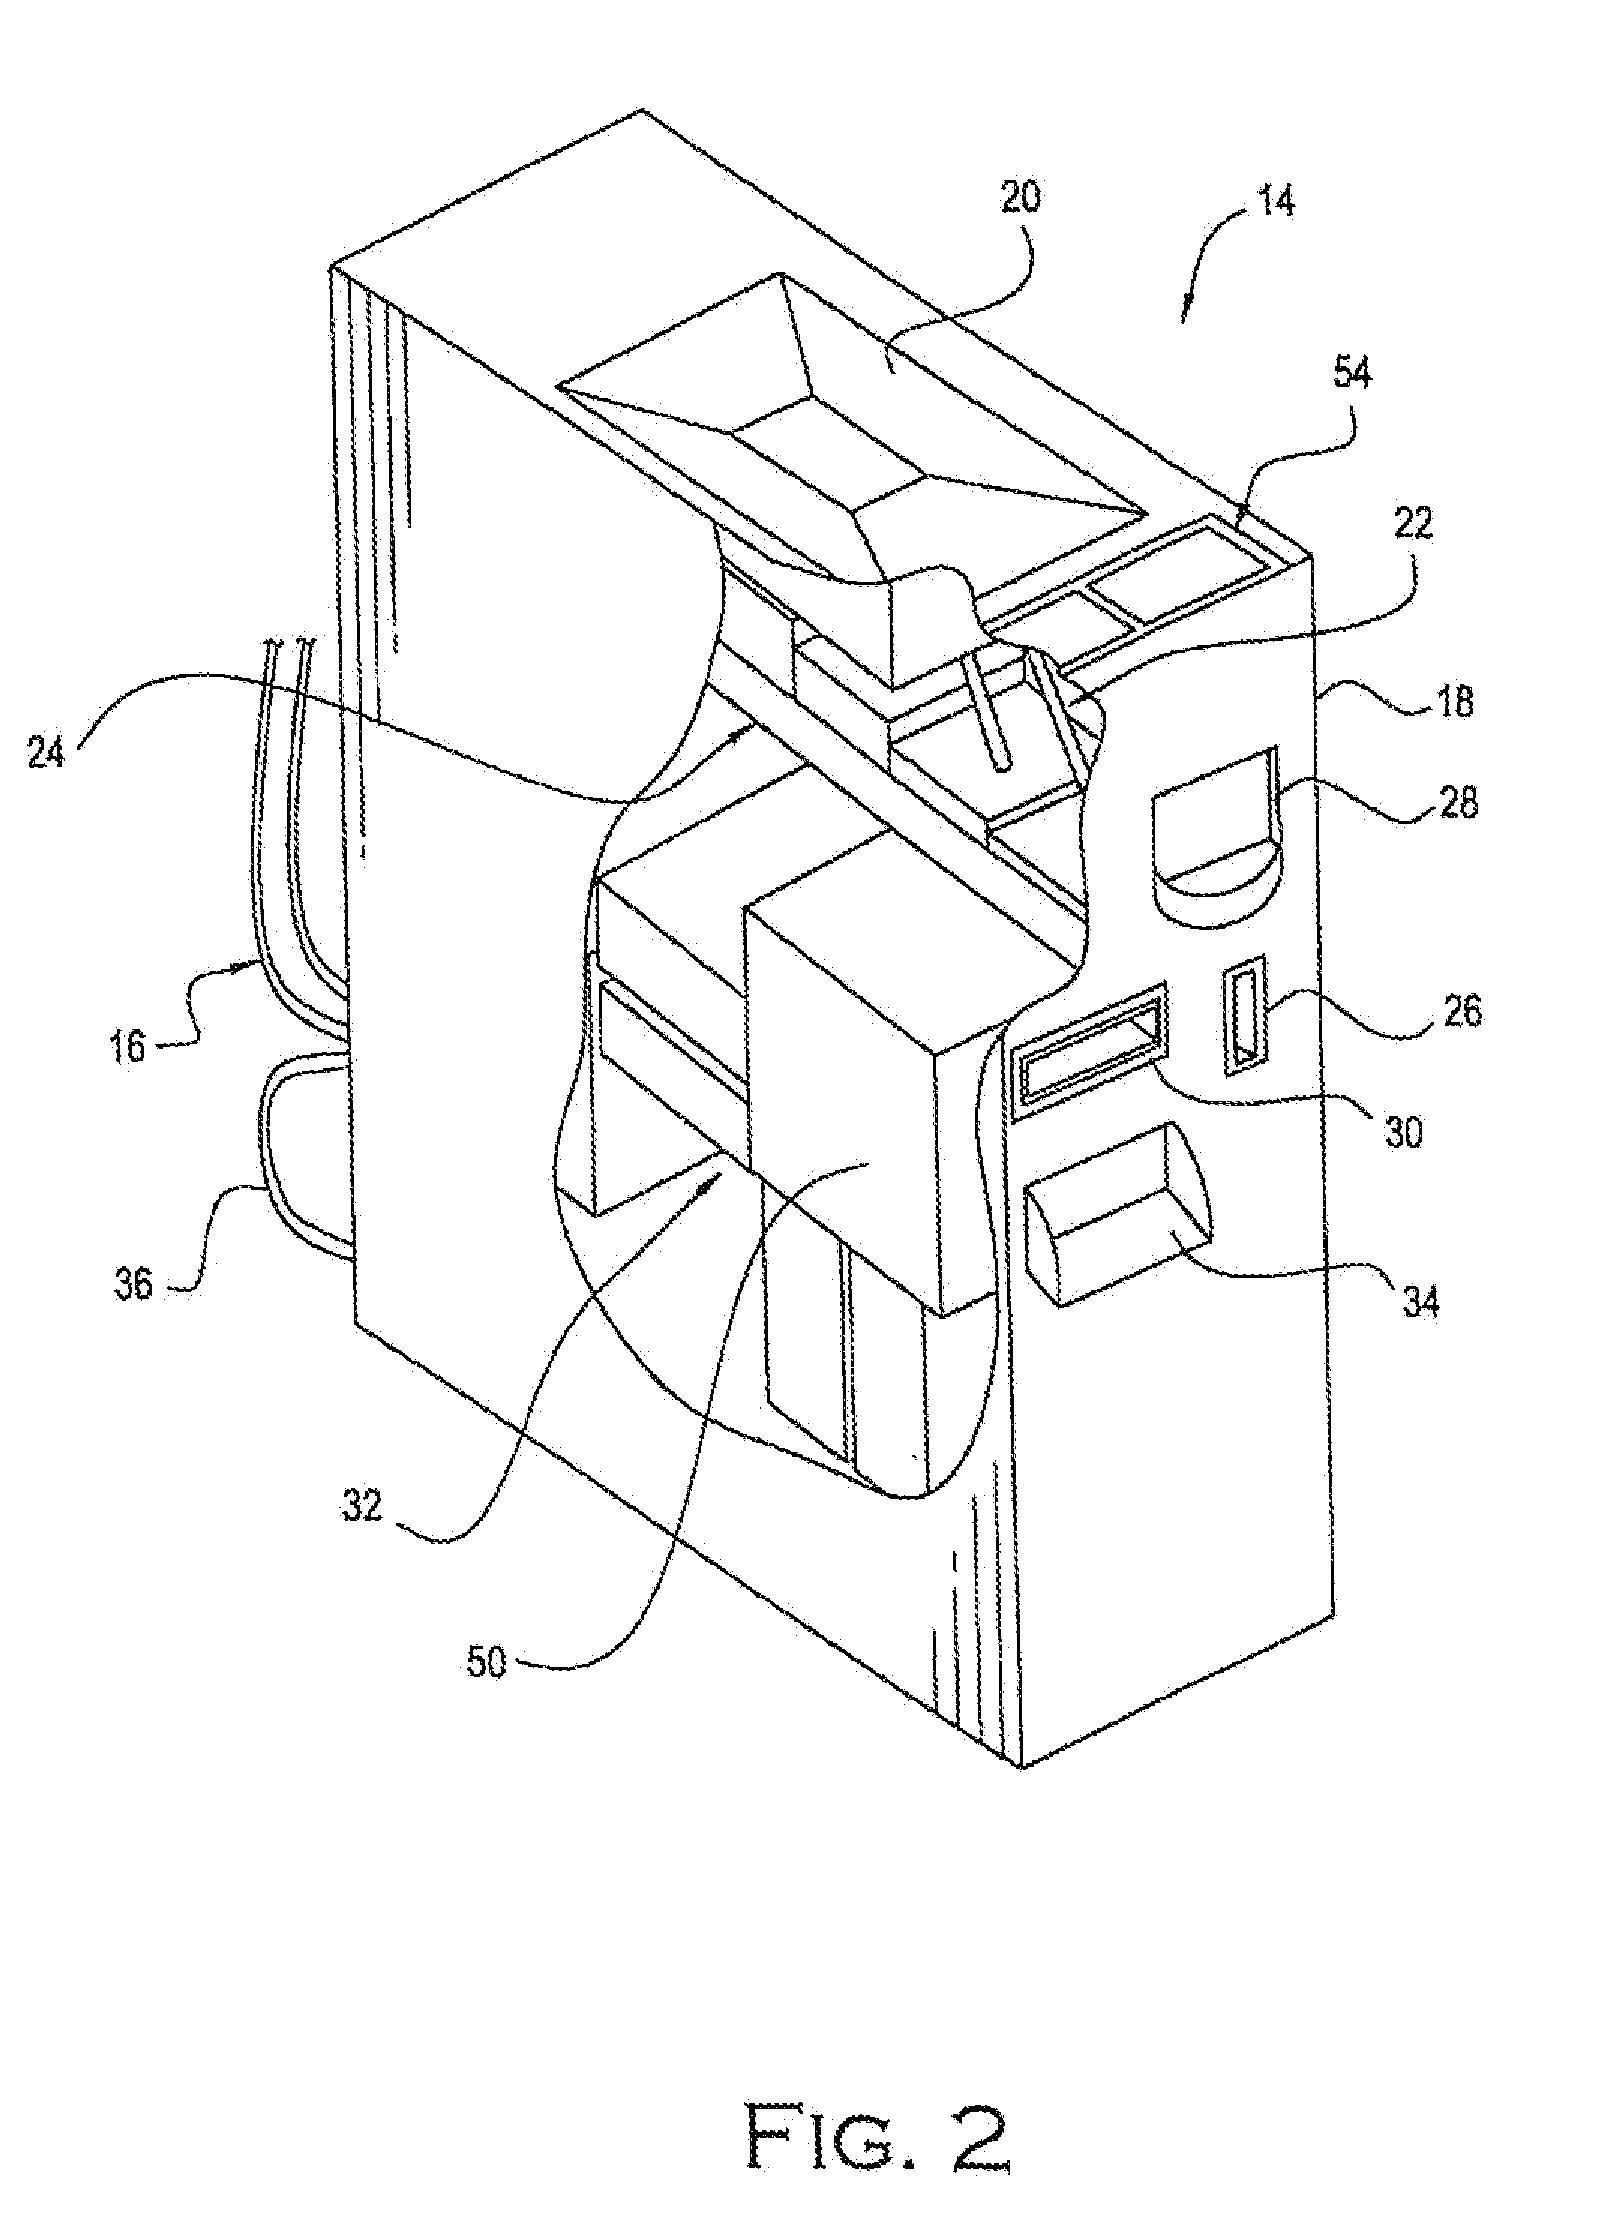 Currency changer device for use with a point of sale terminal